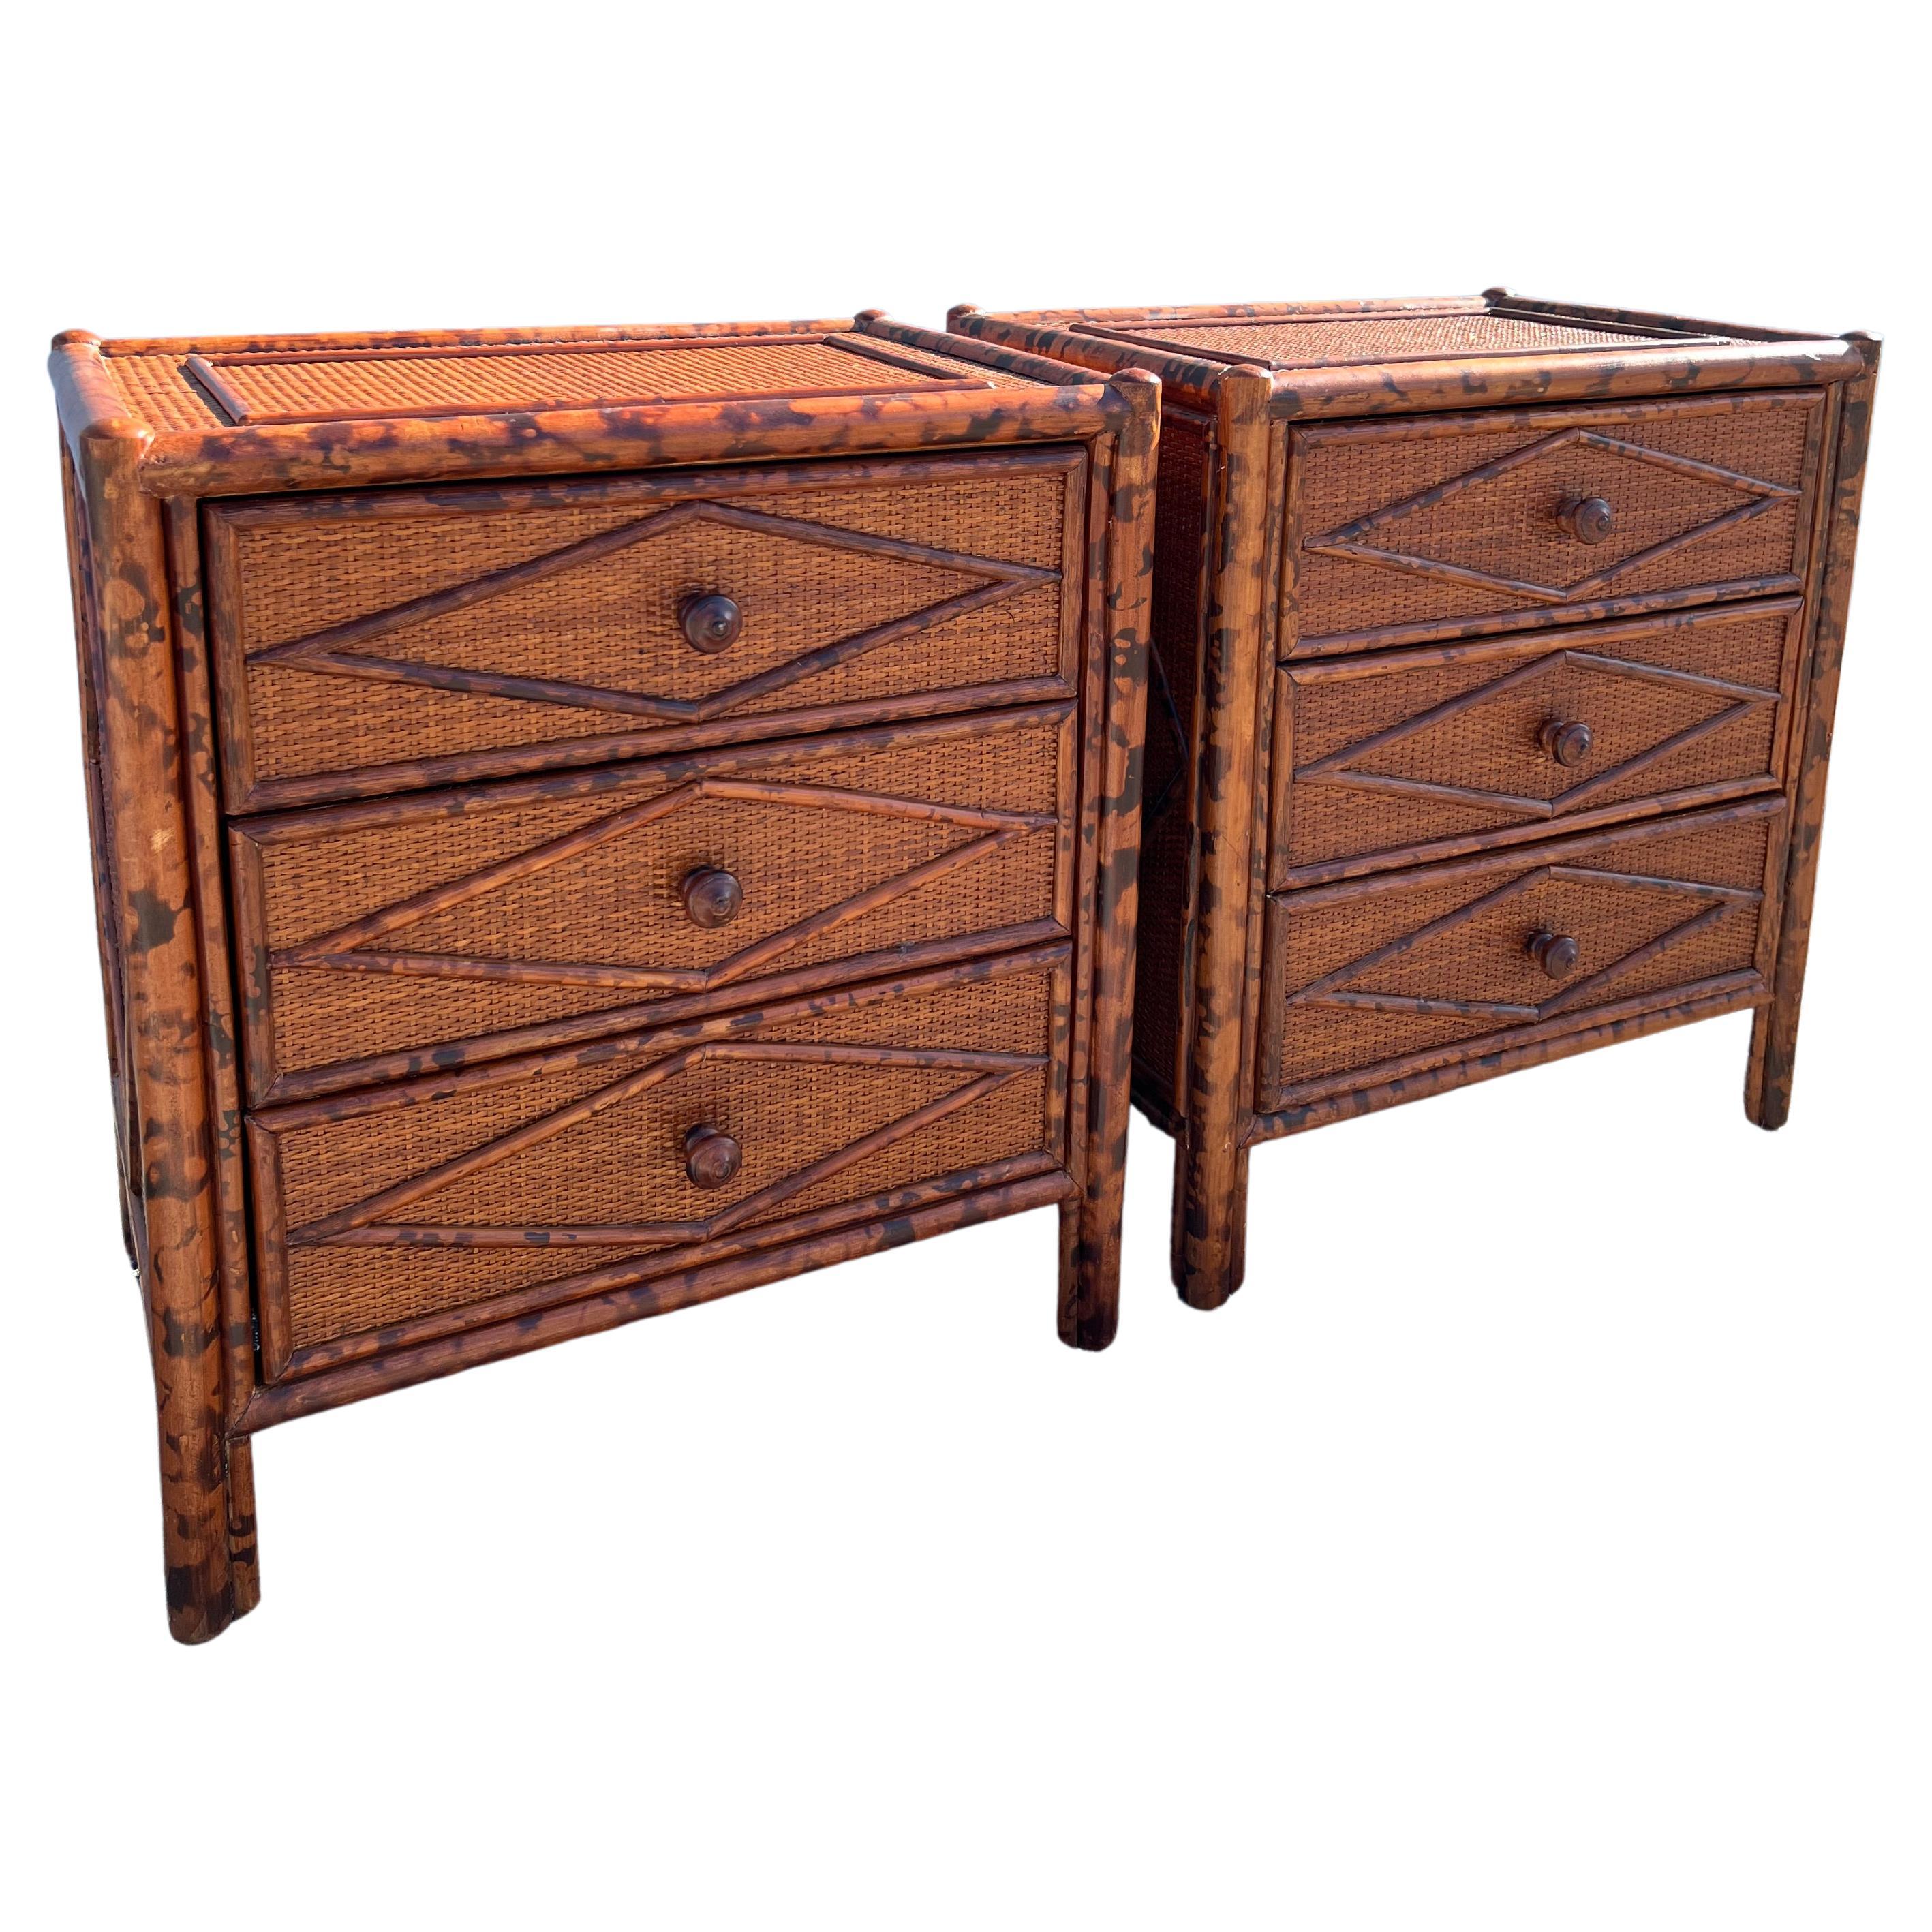 British Colonial Style Burnt Bamboo and Cane Nighstands-A Pair